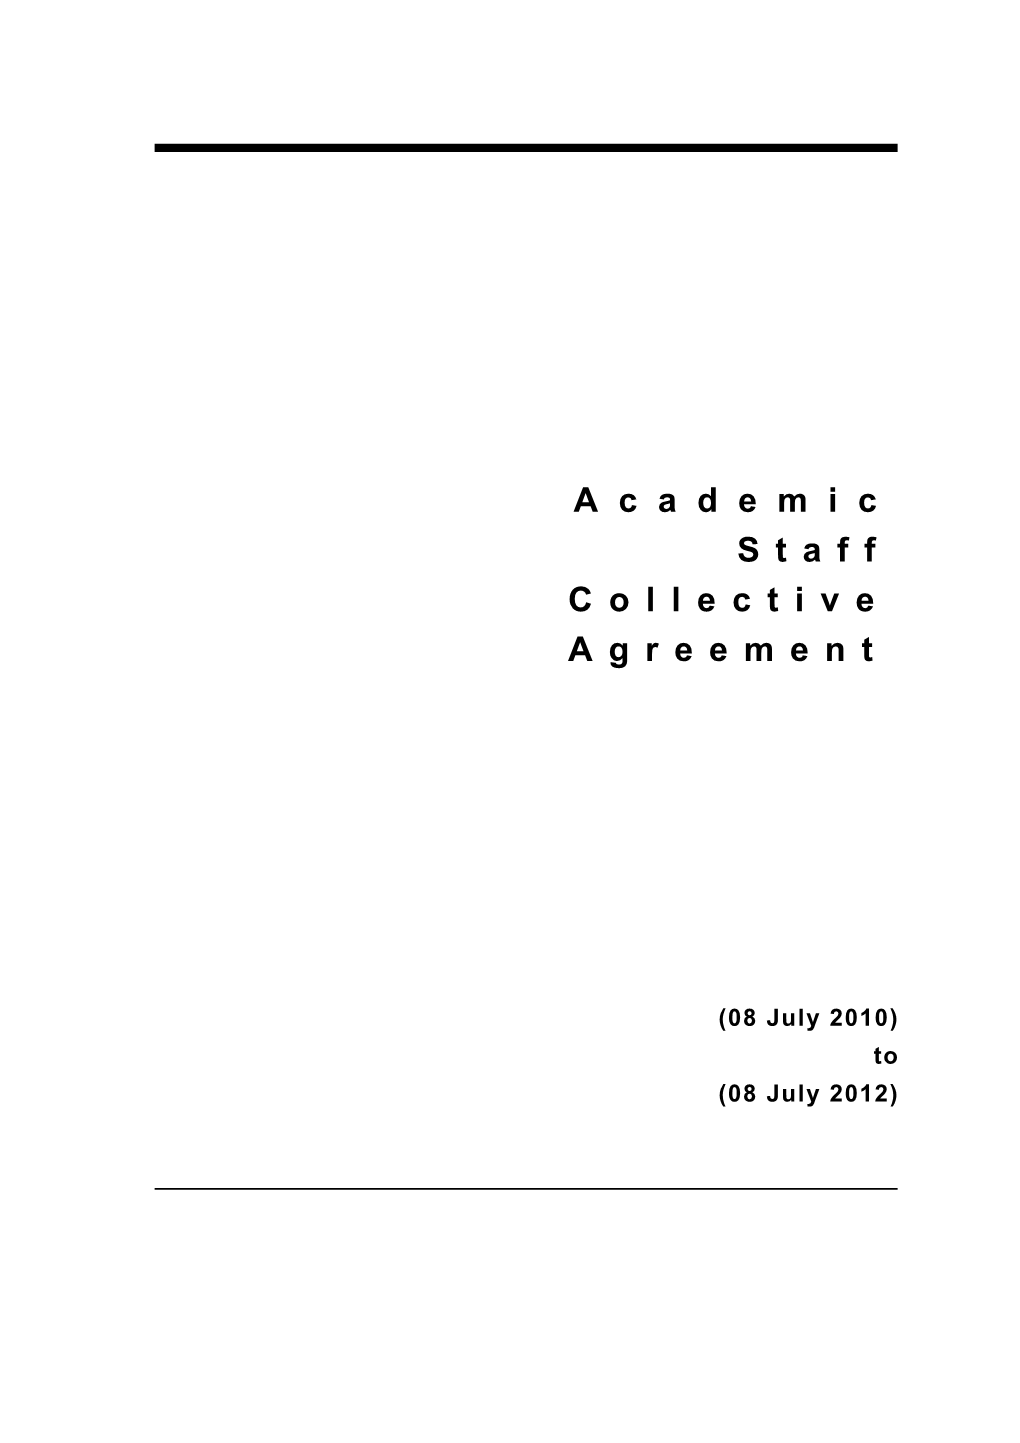 2007 Academic Staff Collective Agreement